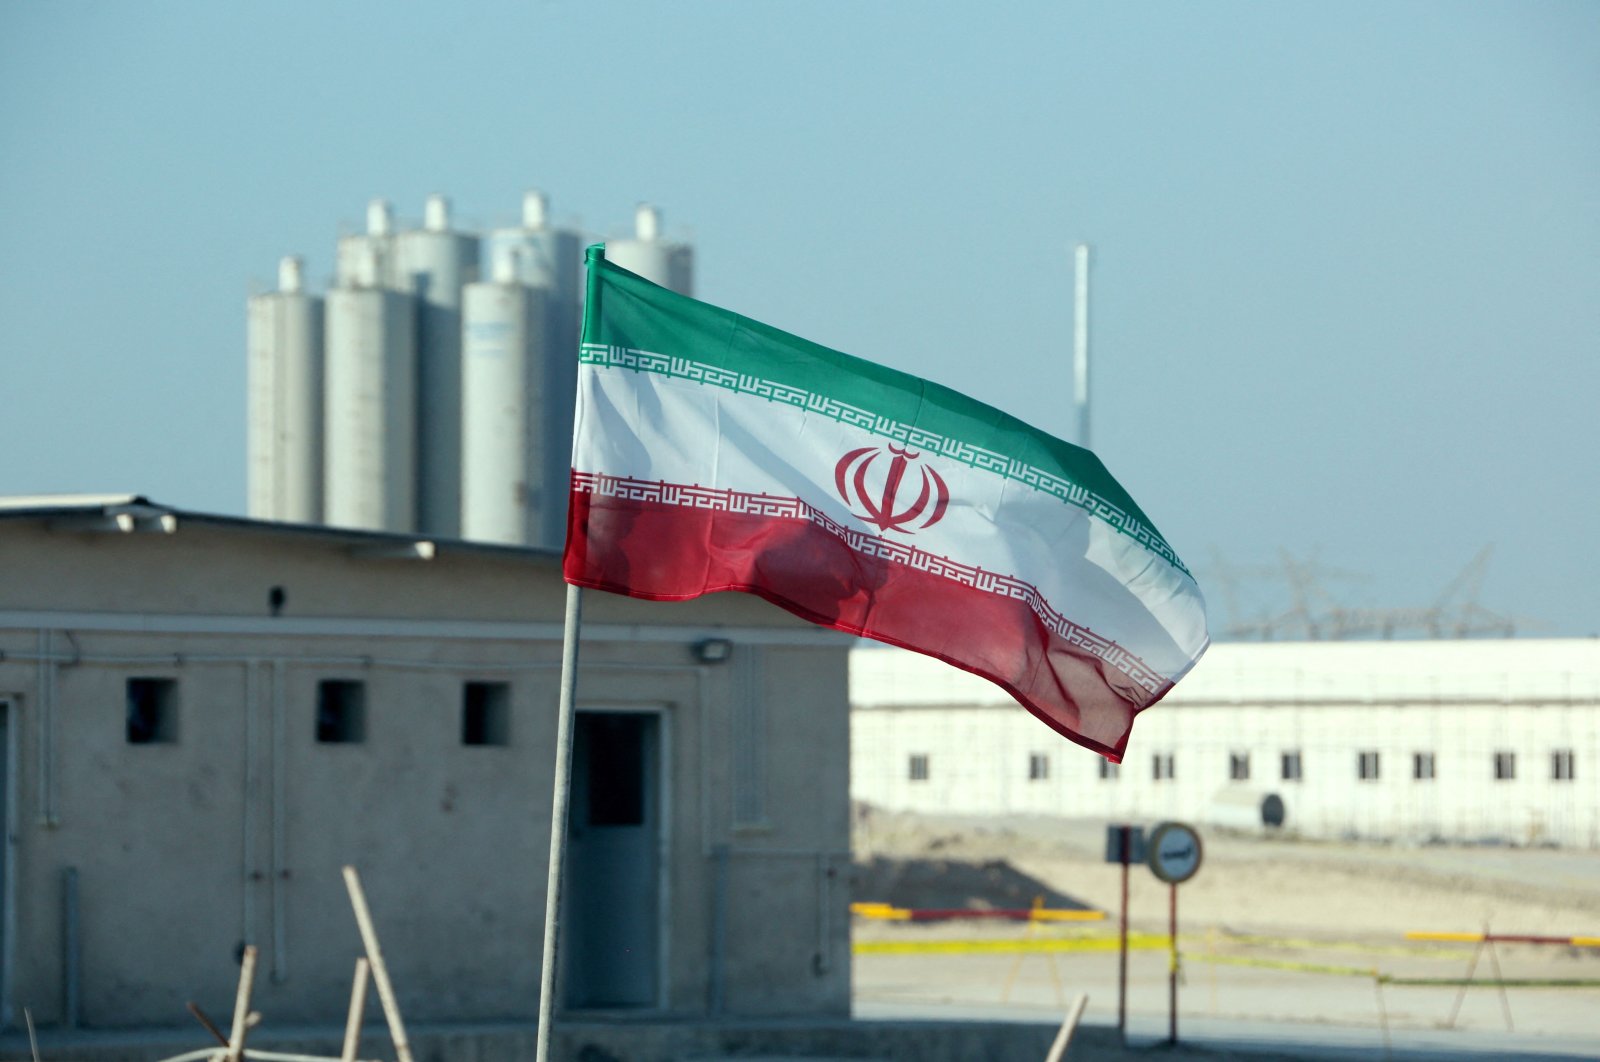 An Iranian flag in Bushehr nuclear power plant, during an official ceremony to kick start works on a second reactor at the facility, Iran, Nov. 10, 2019. (AFP Photo)